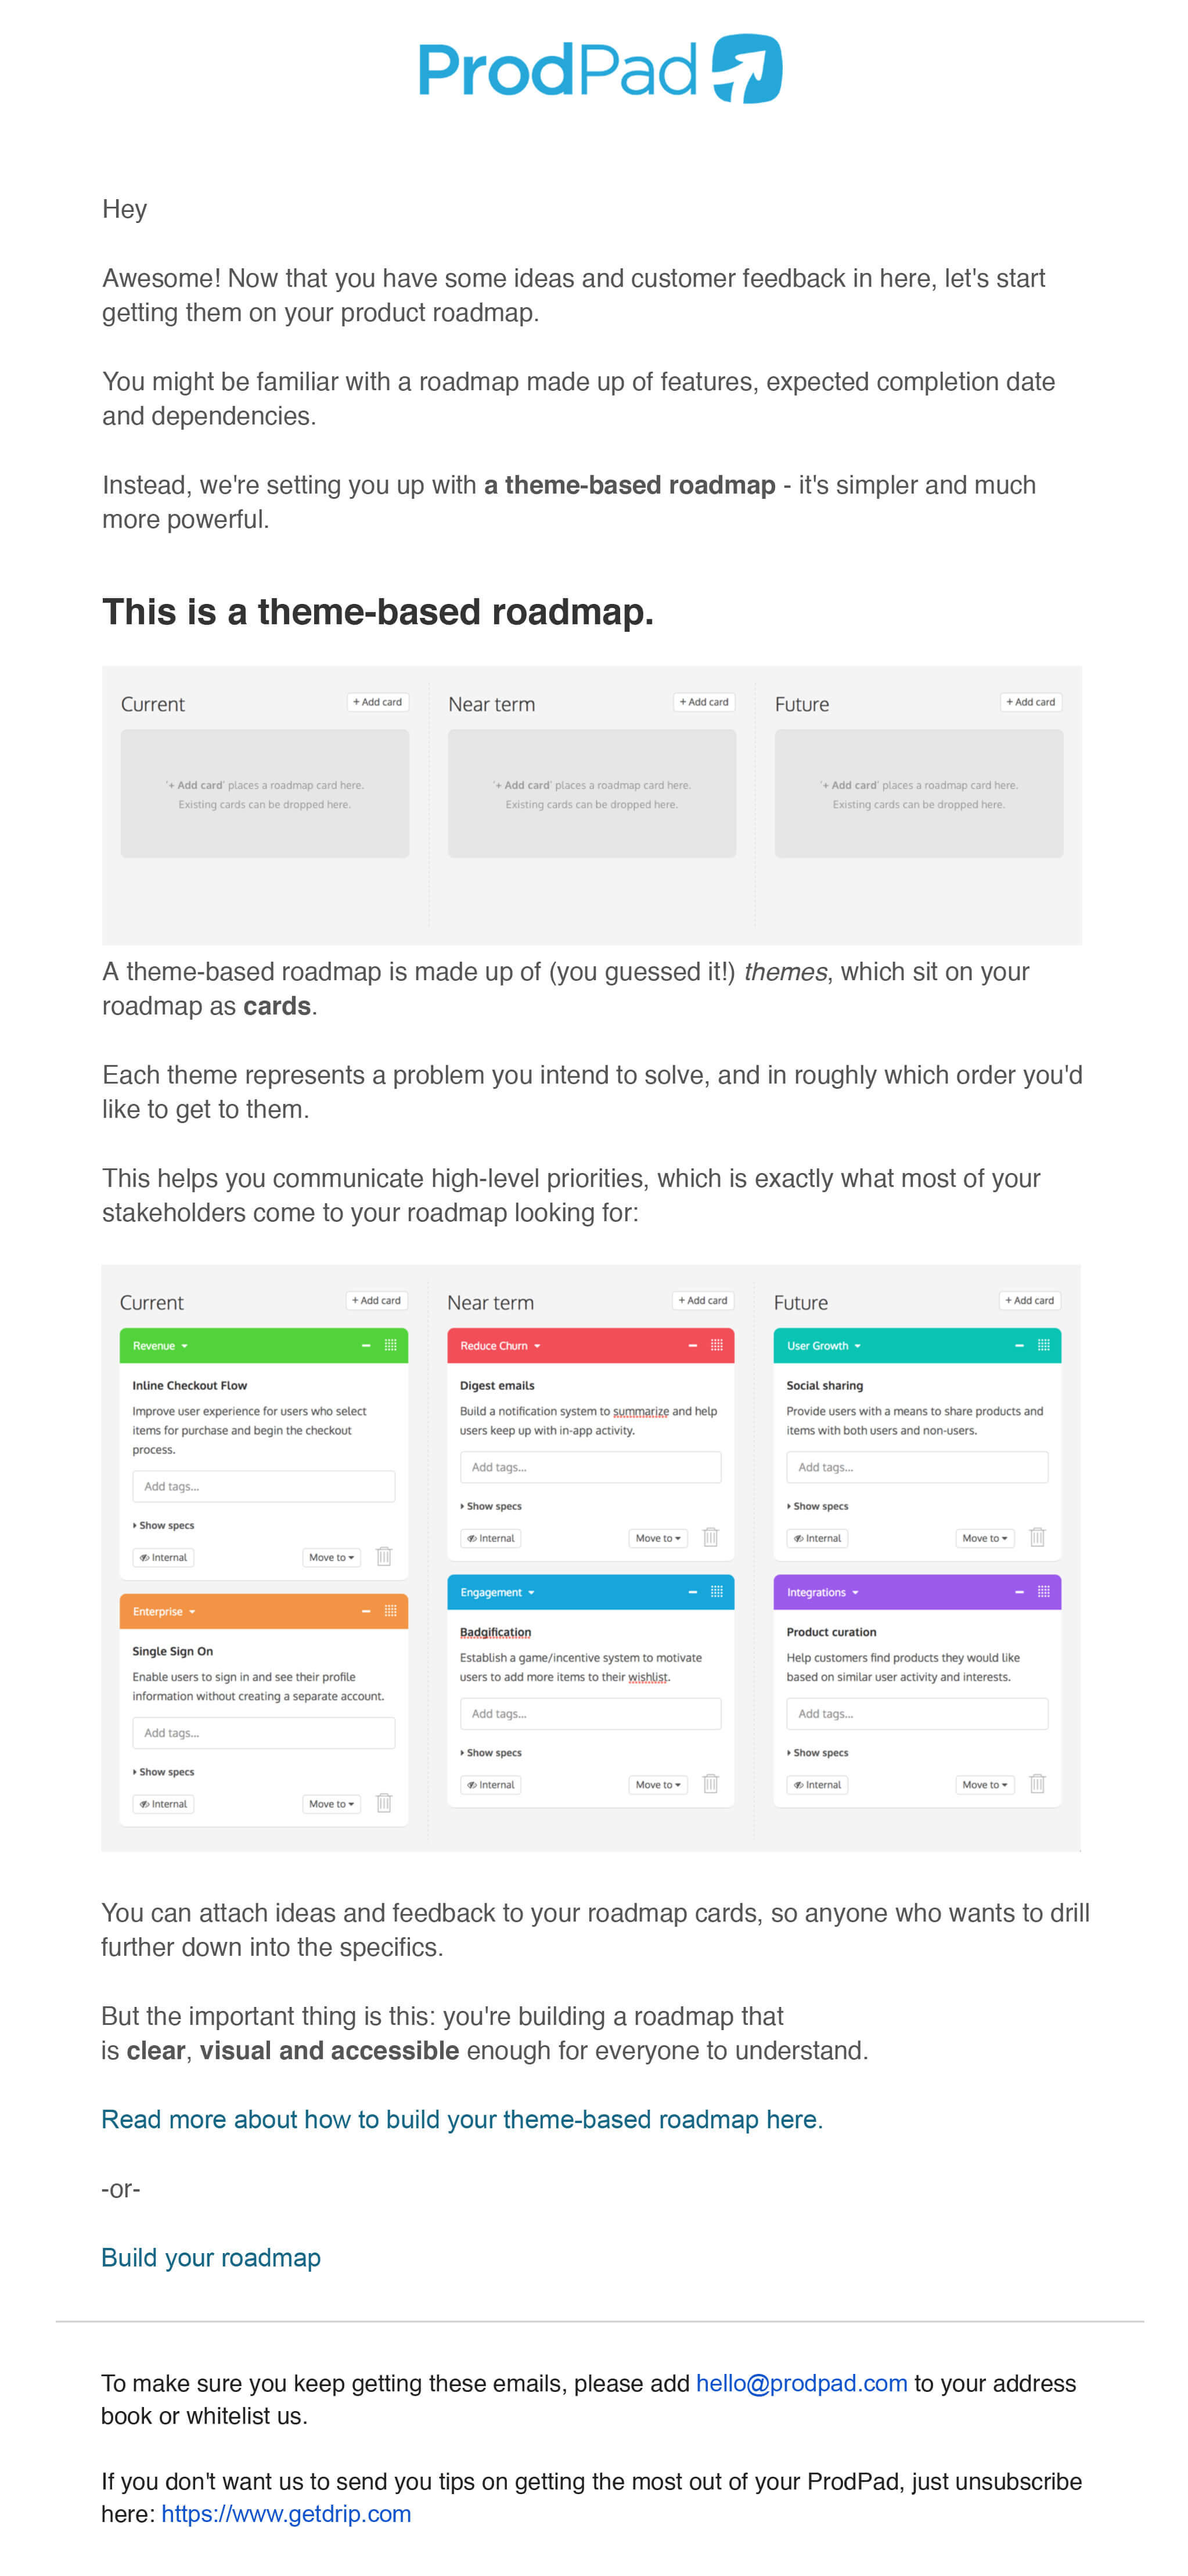 Another example from our user onboarding emails - Theme based roadmaps!